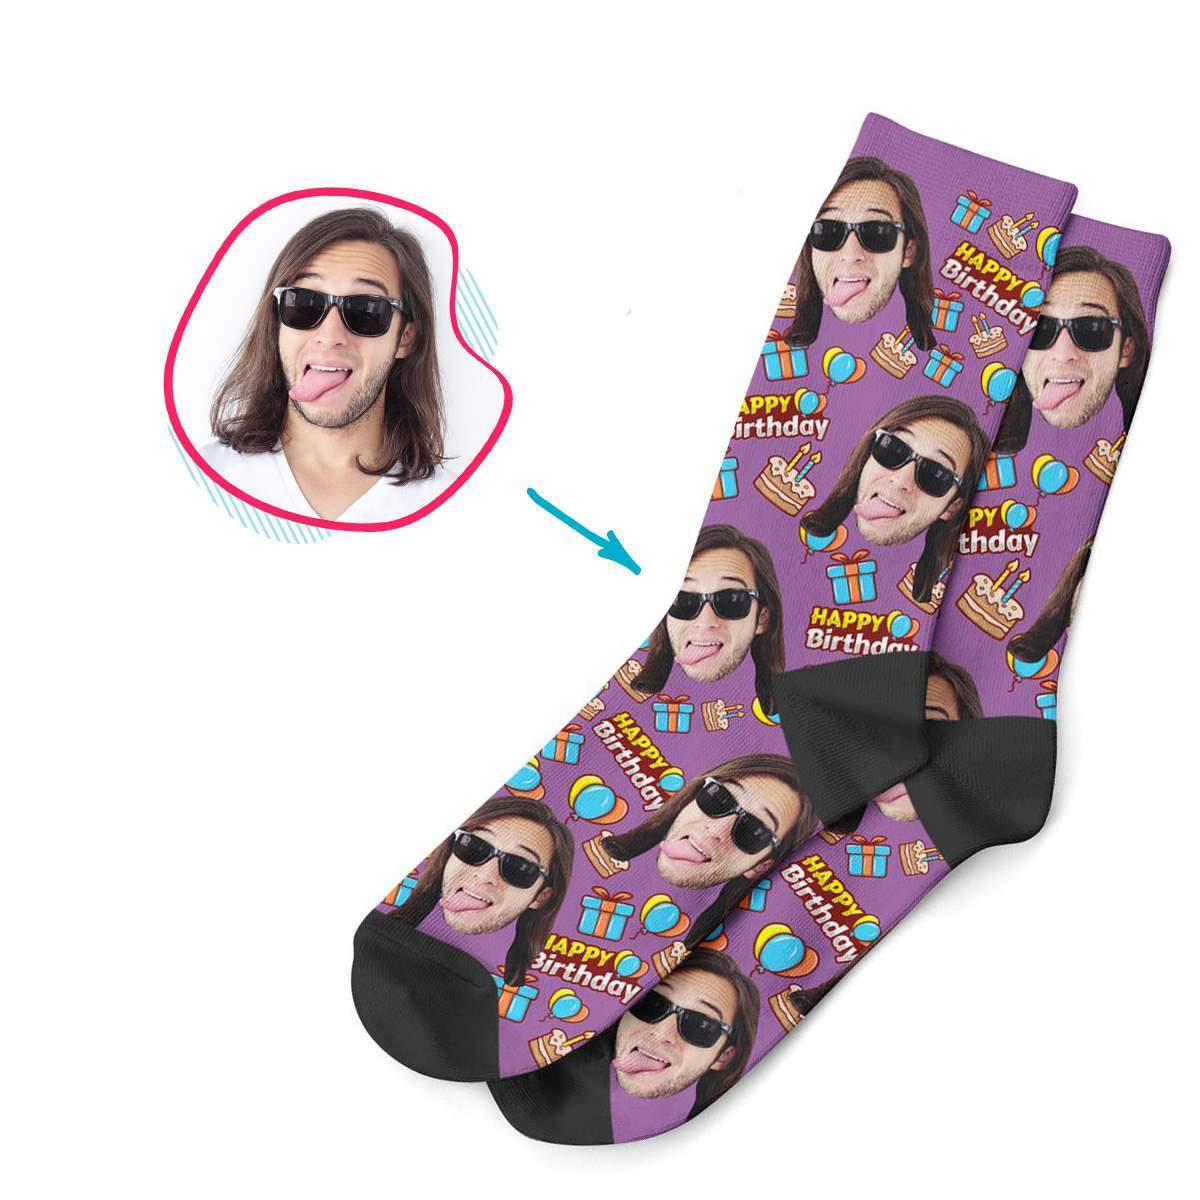 purple Birthday socks personalized with photo of face printed on them